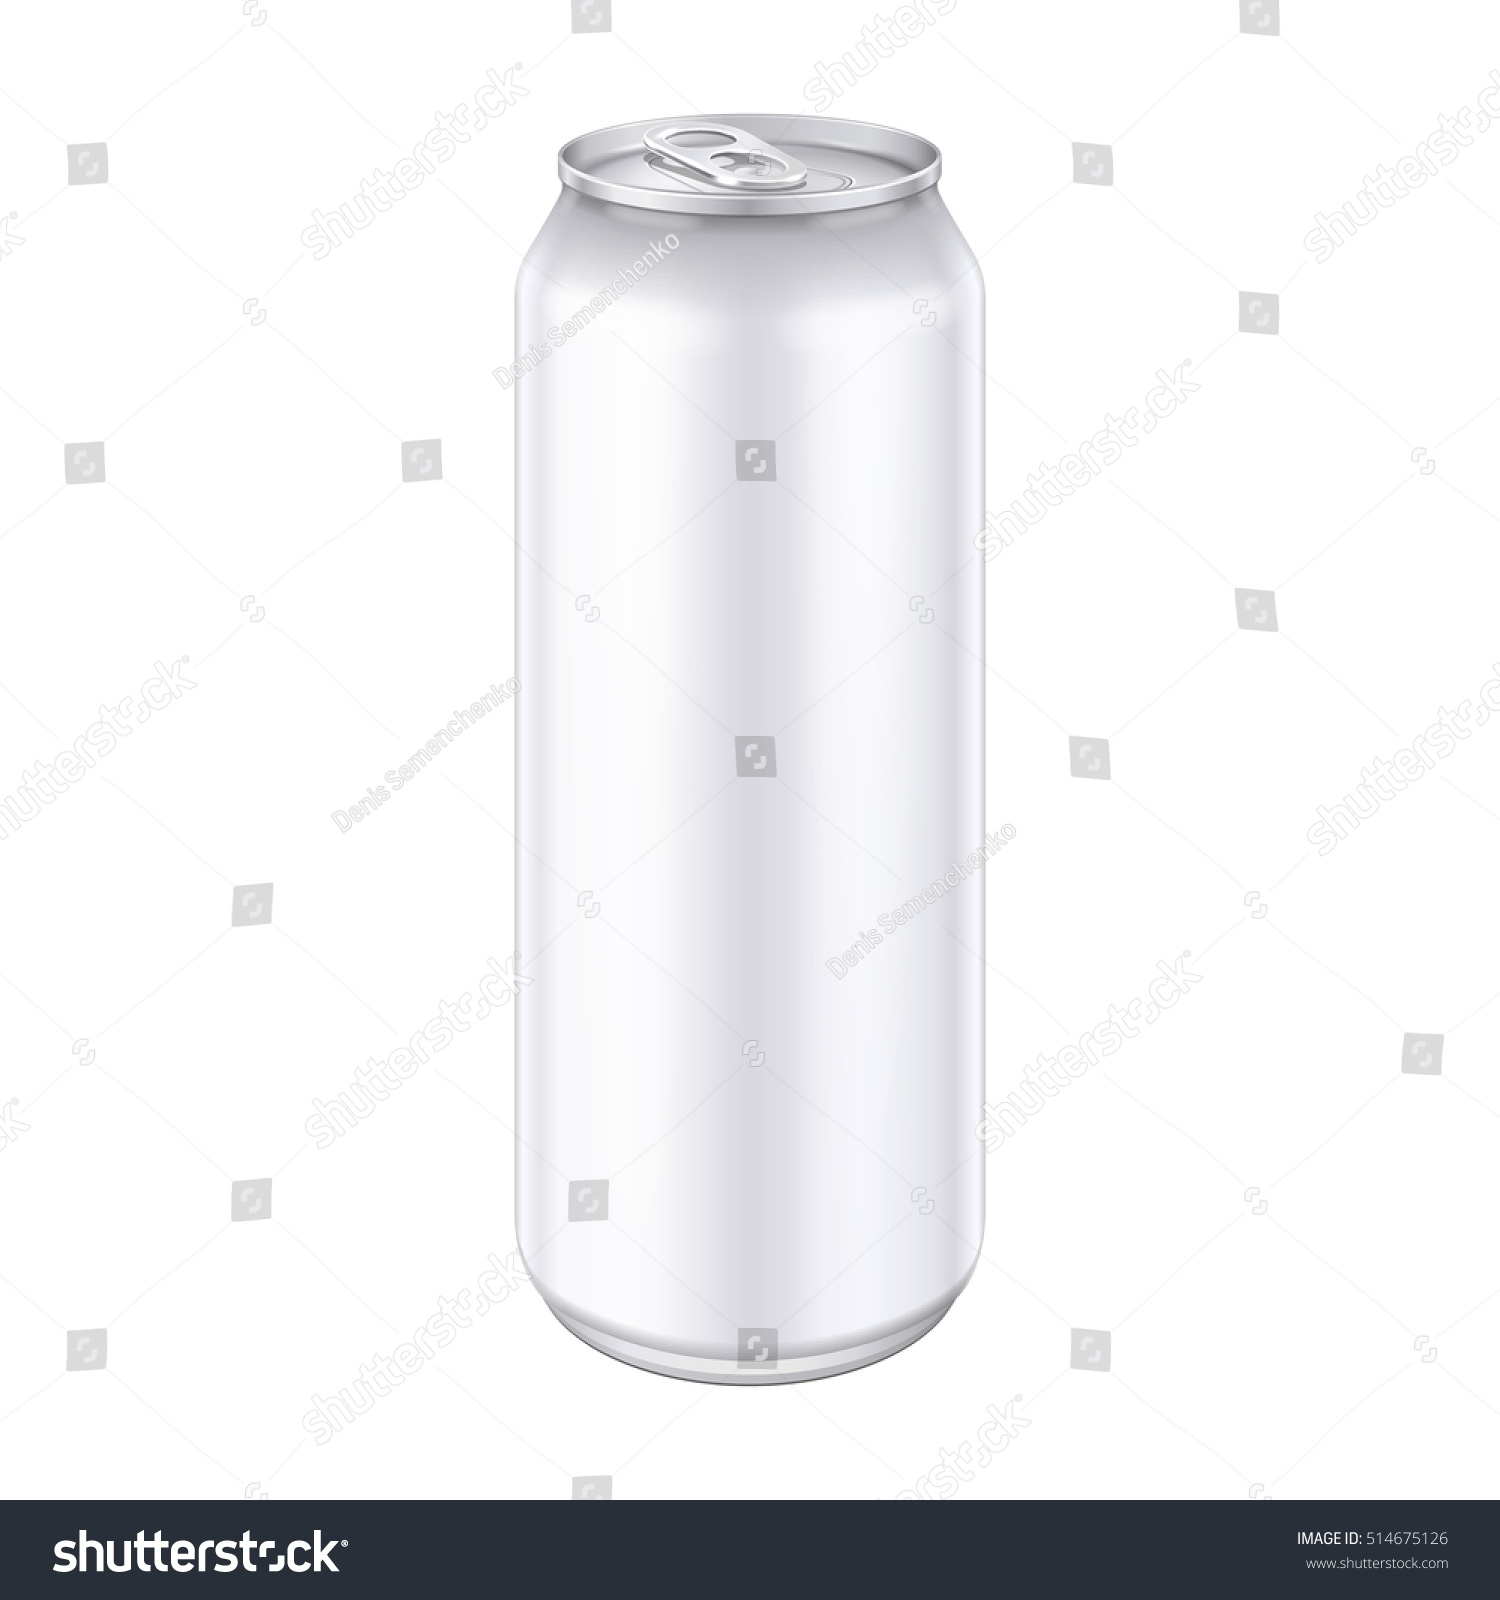 SVG of Metal Aluminum Beverage Drink Can 500ml, 0,5L. Beer, Soda, Lemonade, Juice, Energy. Mockup Template Ready For Your Design. Isolated On White Background. Product Packing. Vector EPS10 svg